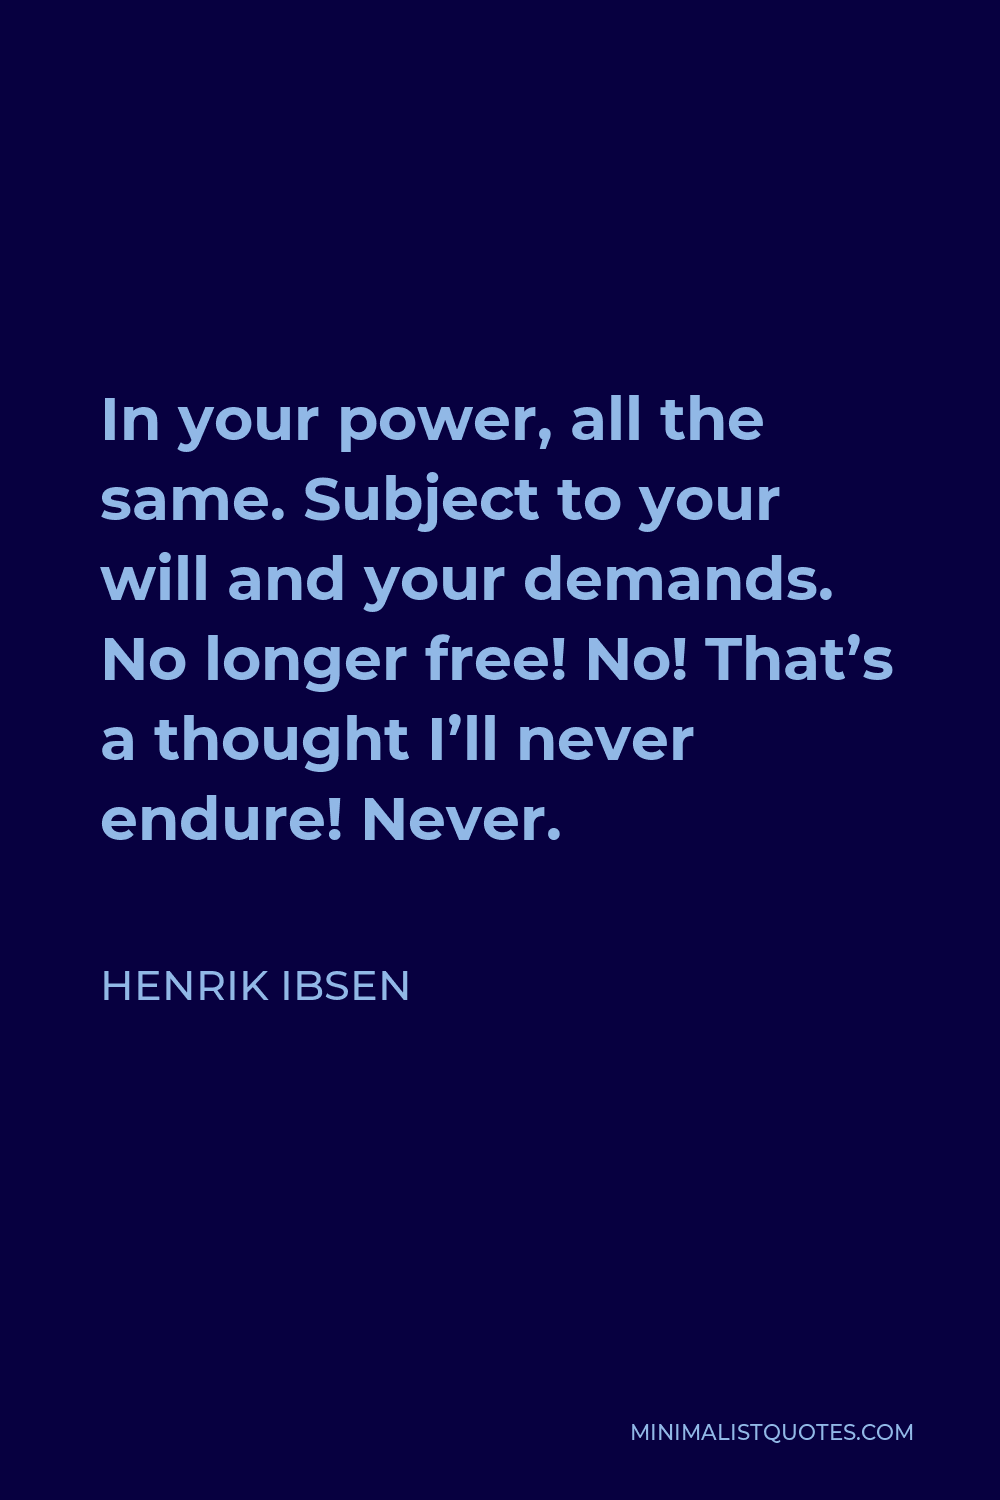 Henrik Ibsen Quote - In your power, all the same. Subject to your will and your demands. No longer free! No! That’s a thought I’ll never endure! Never.